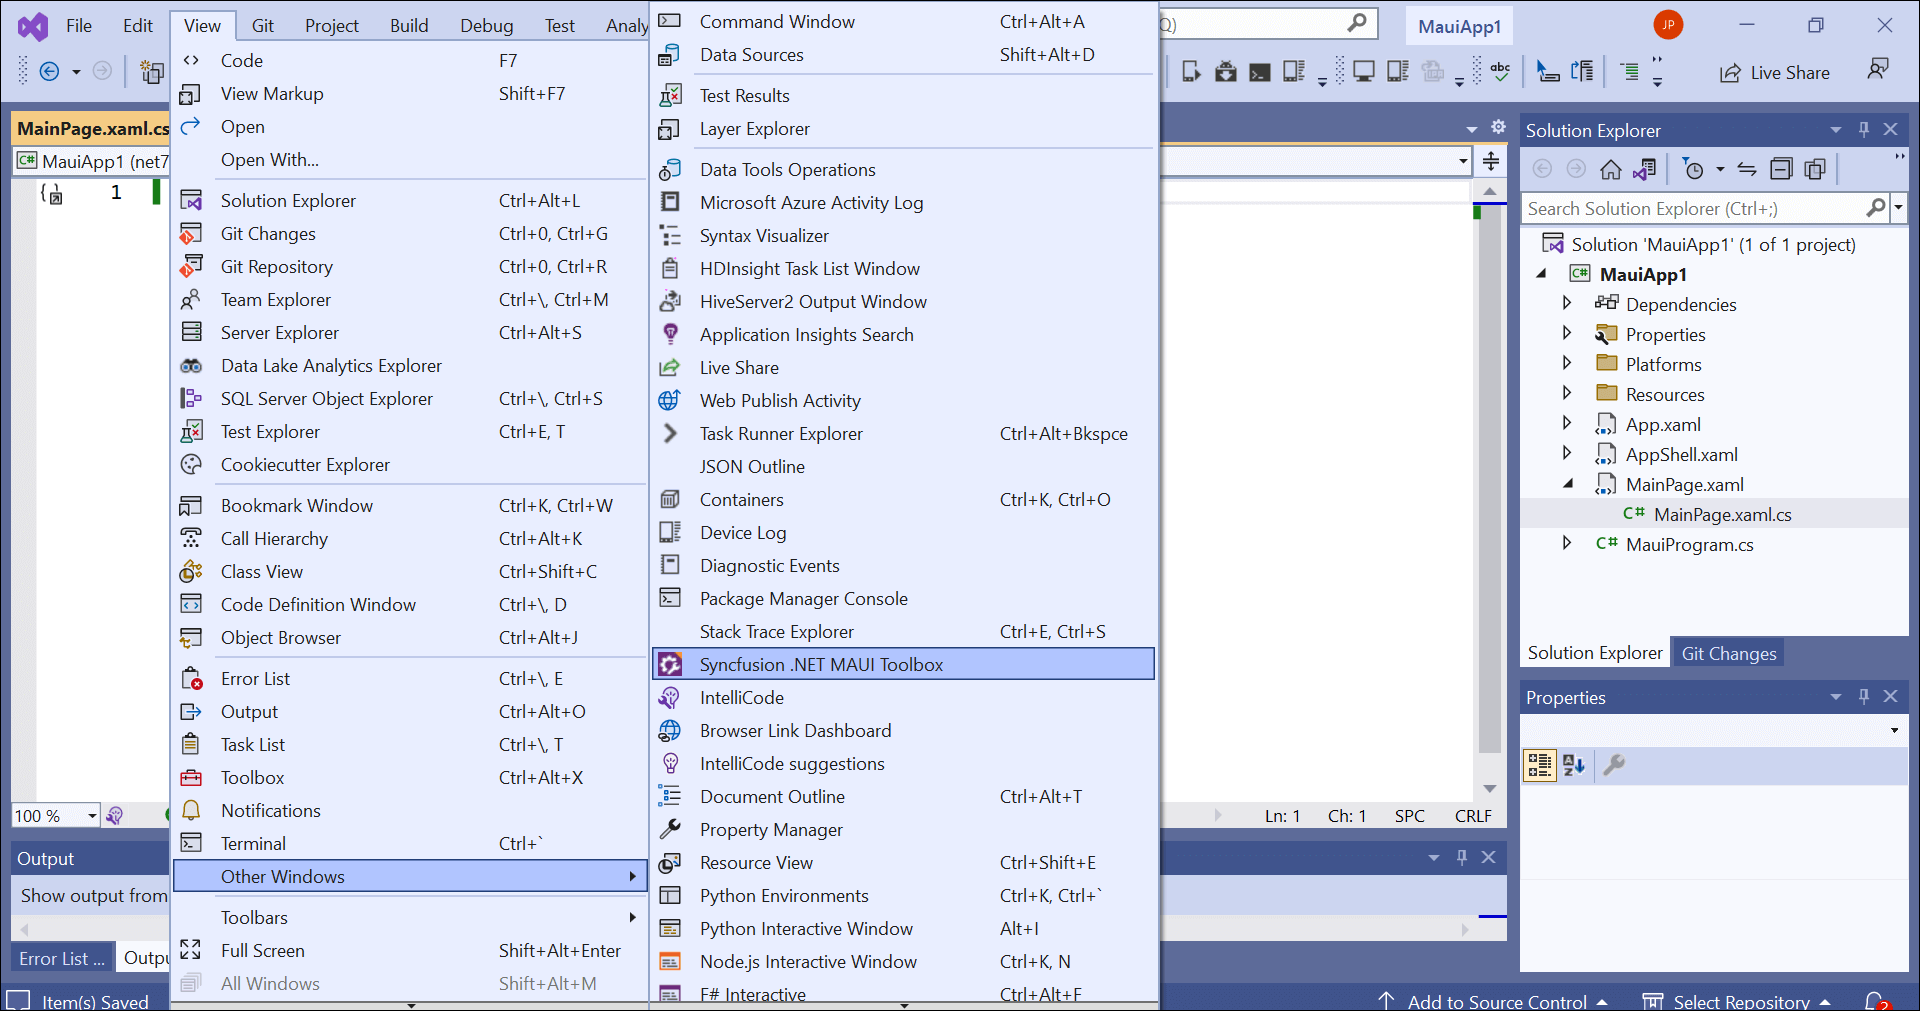 Choose View -> Other Windows -> Syncfusion .NET MAUI Toolbox from the Visual Studio menu